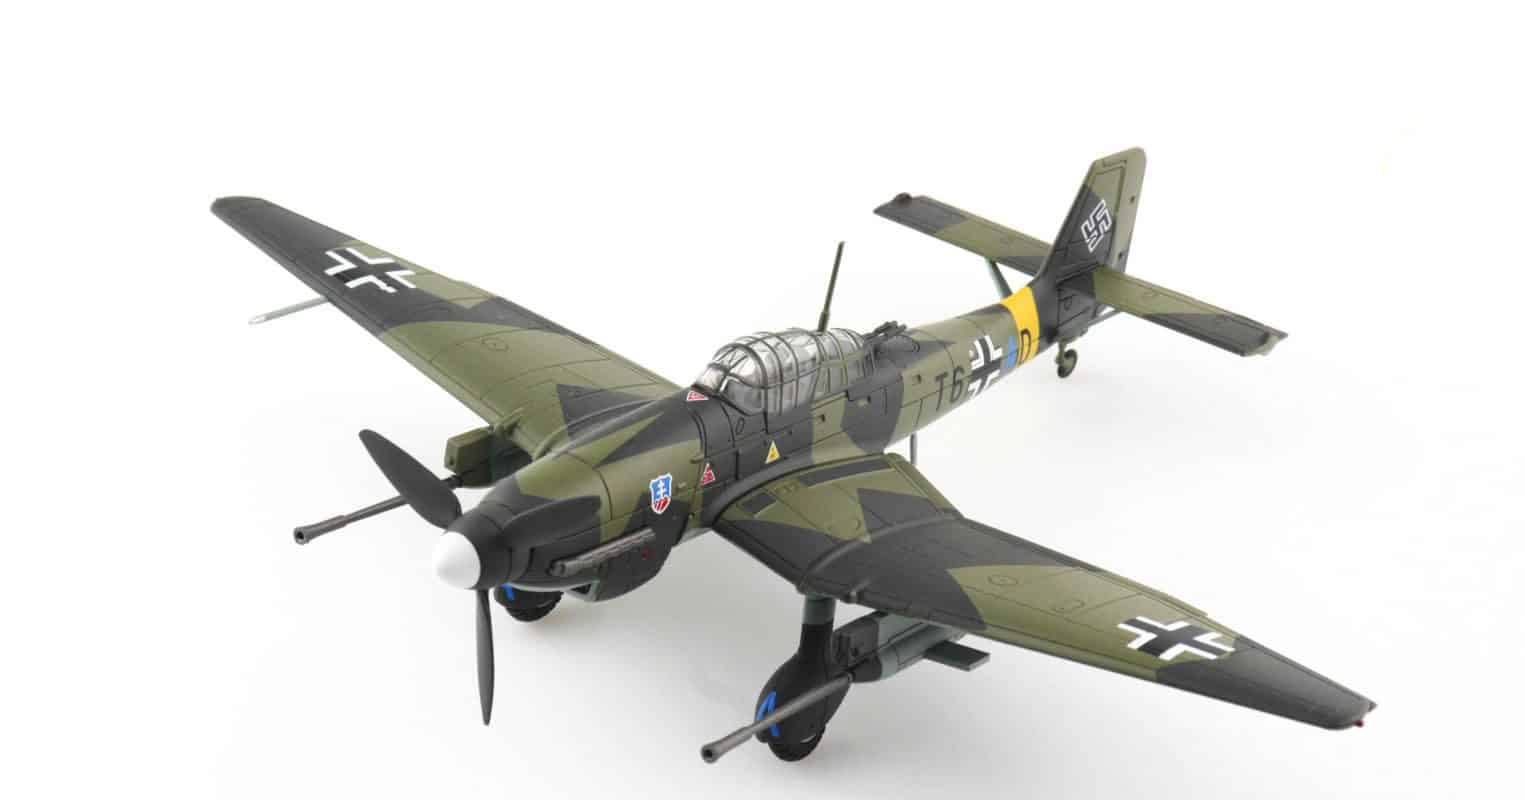 Front port side view of Hobby Master HA0132 - 1/72 scale diecast model of  the Ju 87 G-1 Stuka Geschwaderkennung T6+AD. Flown by Hans Rudel of Stab/StG 2, Luftwaffe, Eastern Front.